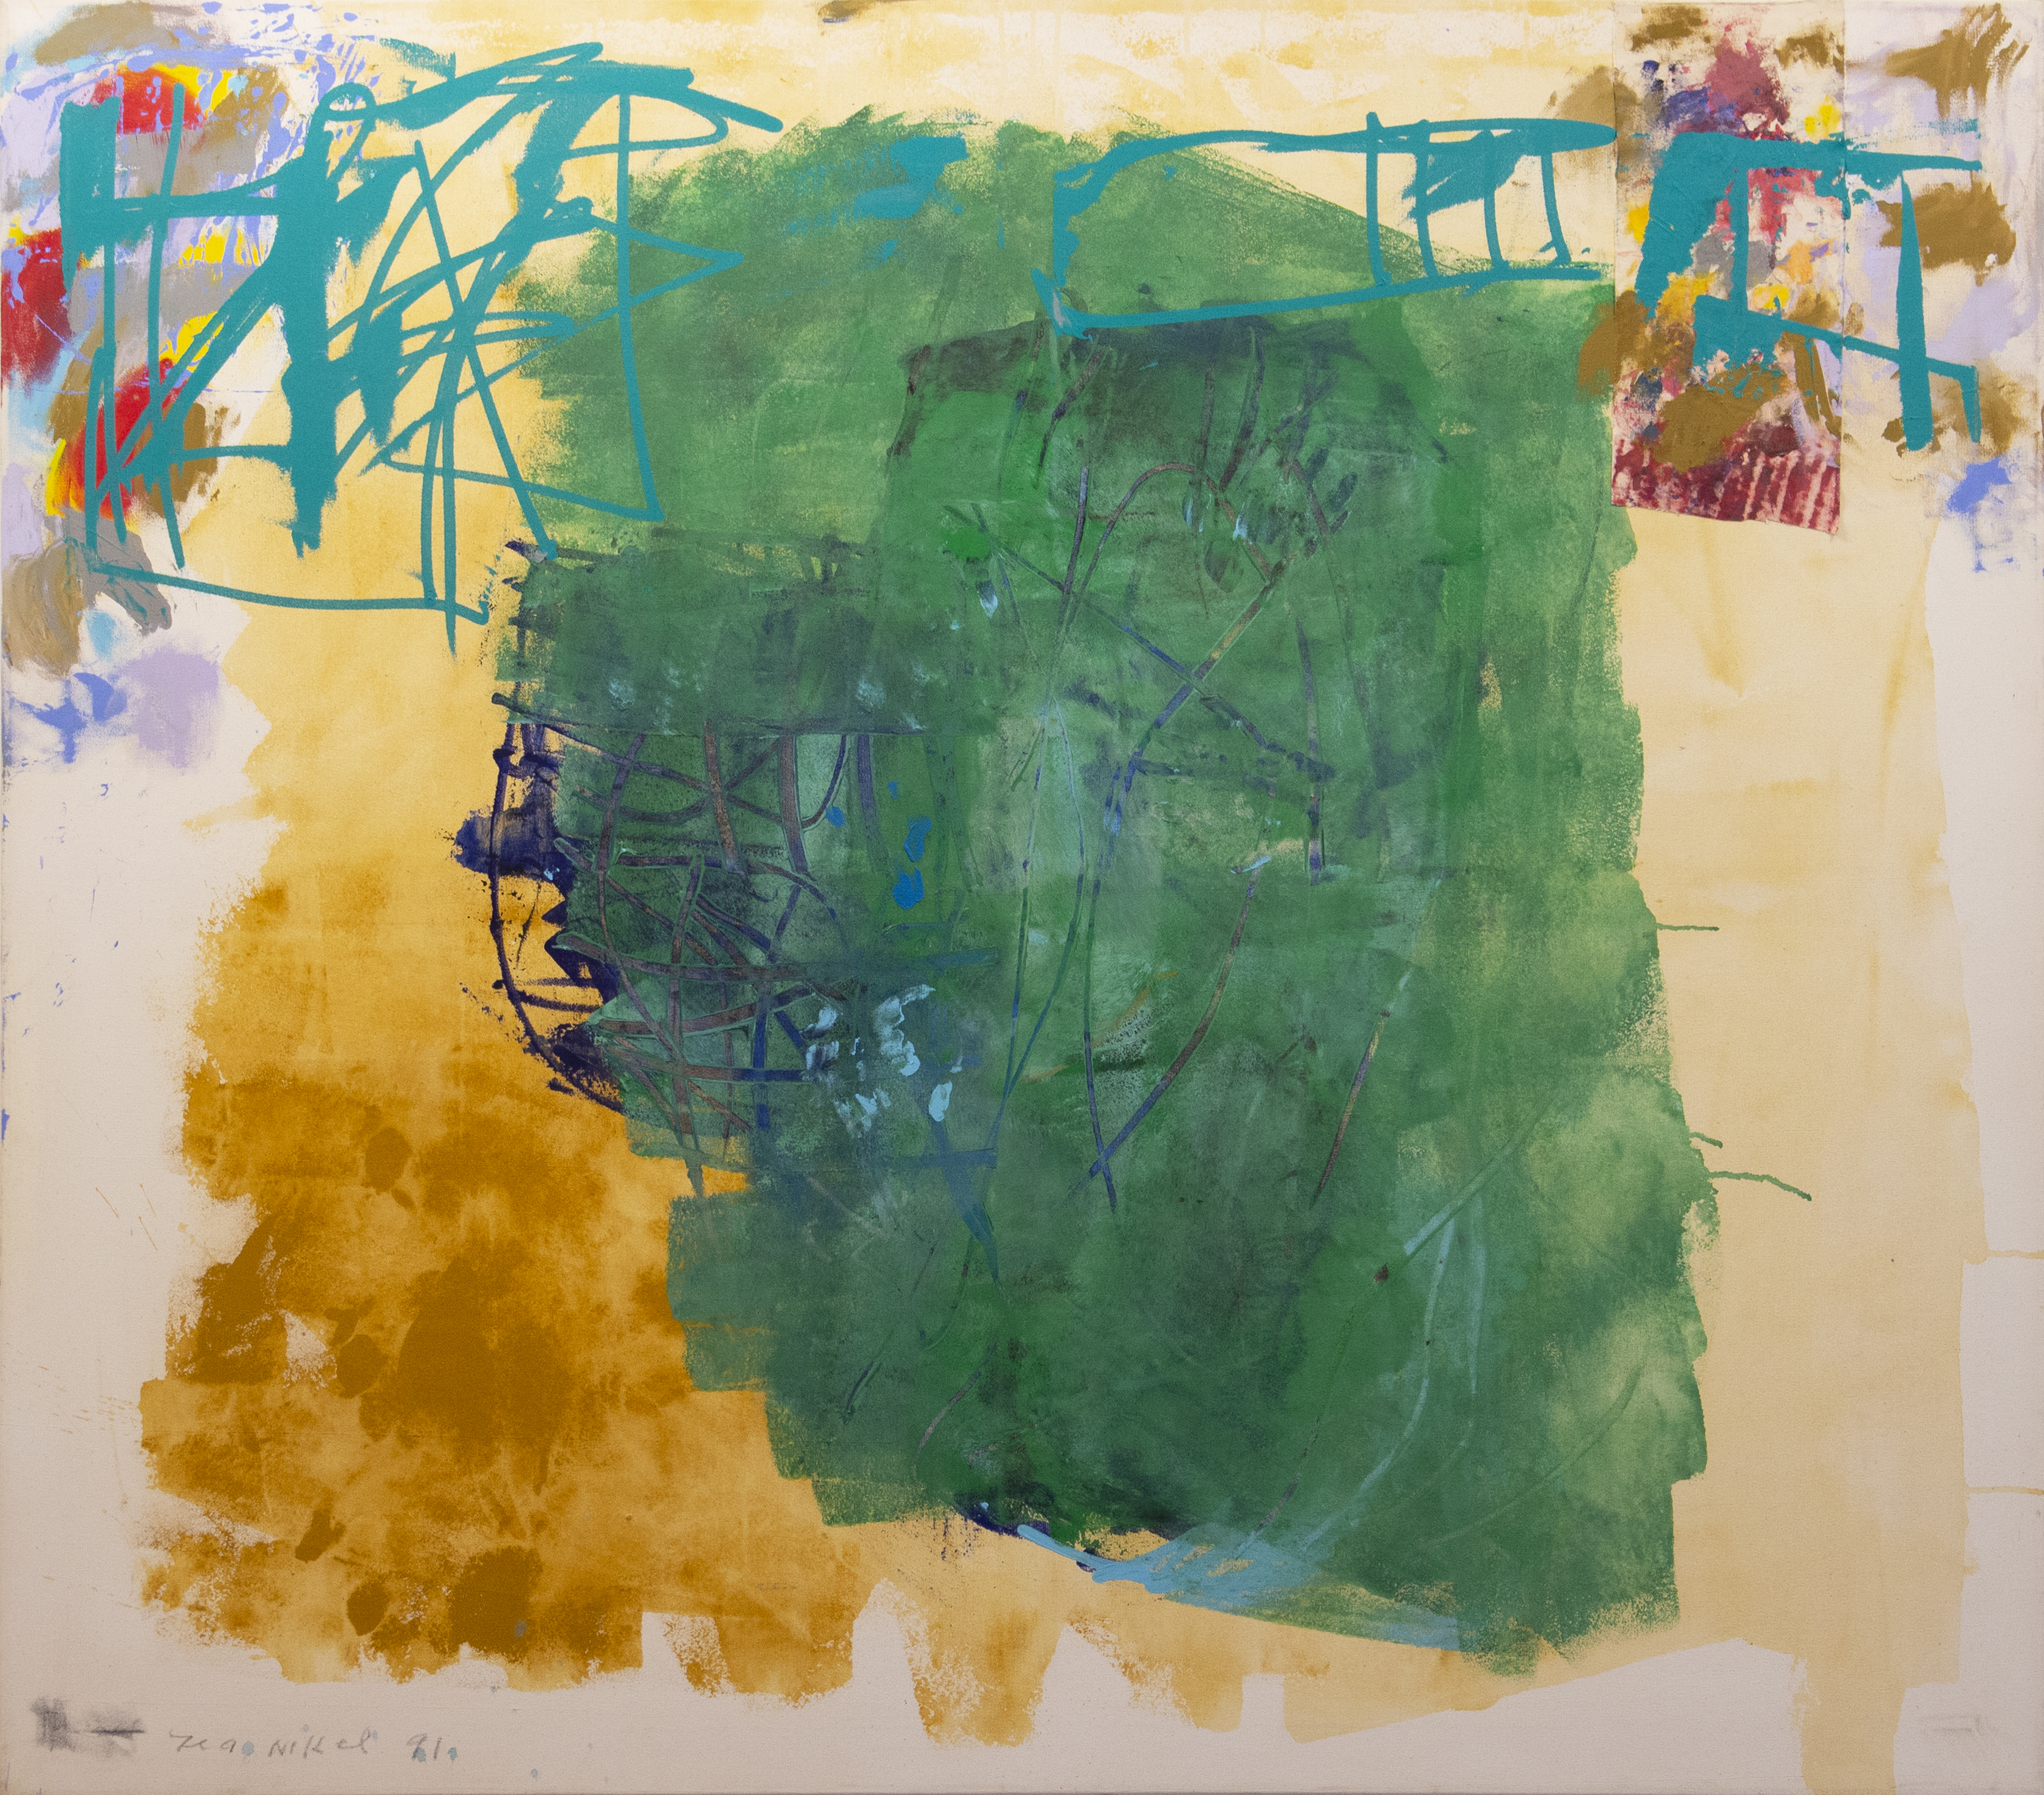 Lea Nikel, Untitled, 1991, acrylic and collage on canvas, 150x170 cm 